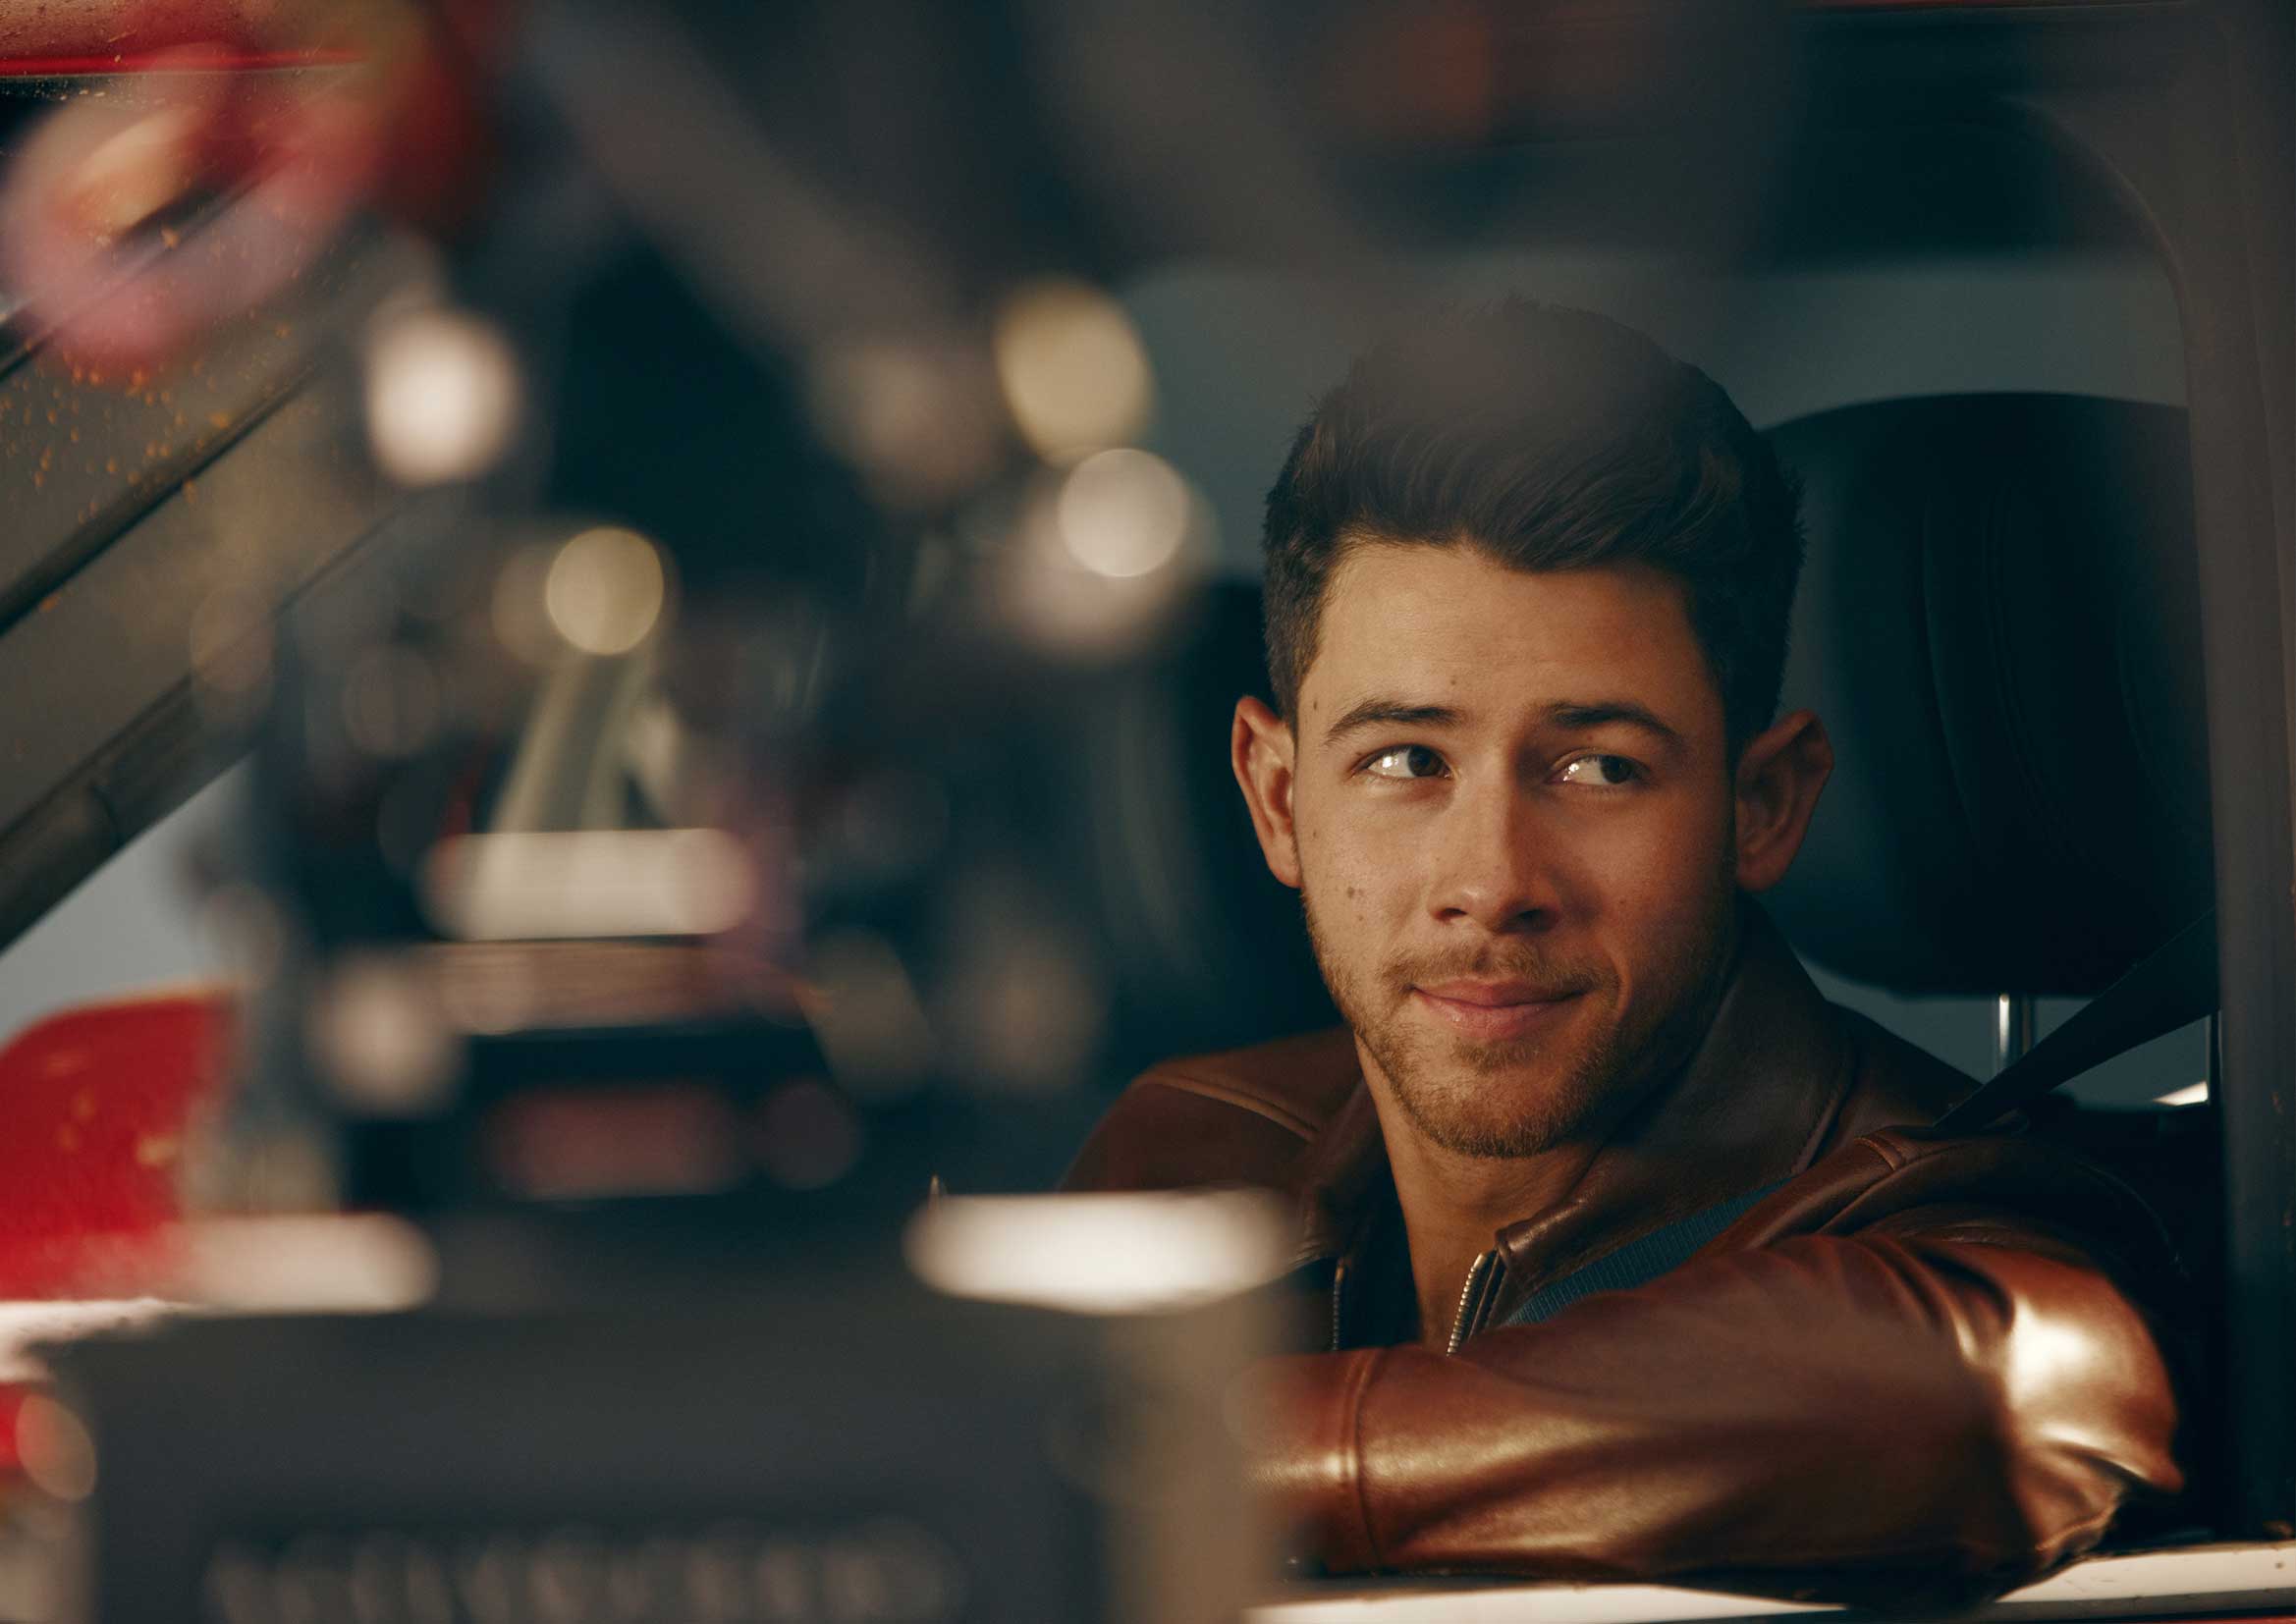 Nick Jonas stars alongside a celebrity cast in Toyota’s Big Game ad, “The Joneses” featuring the all-new 2022 Toyota Tundra.